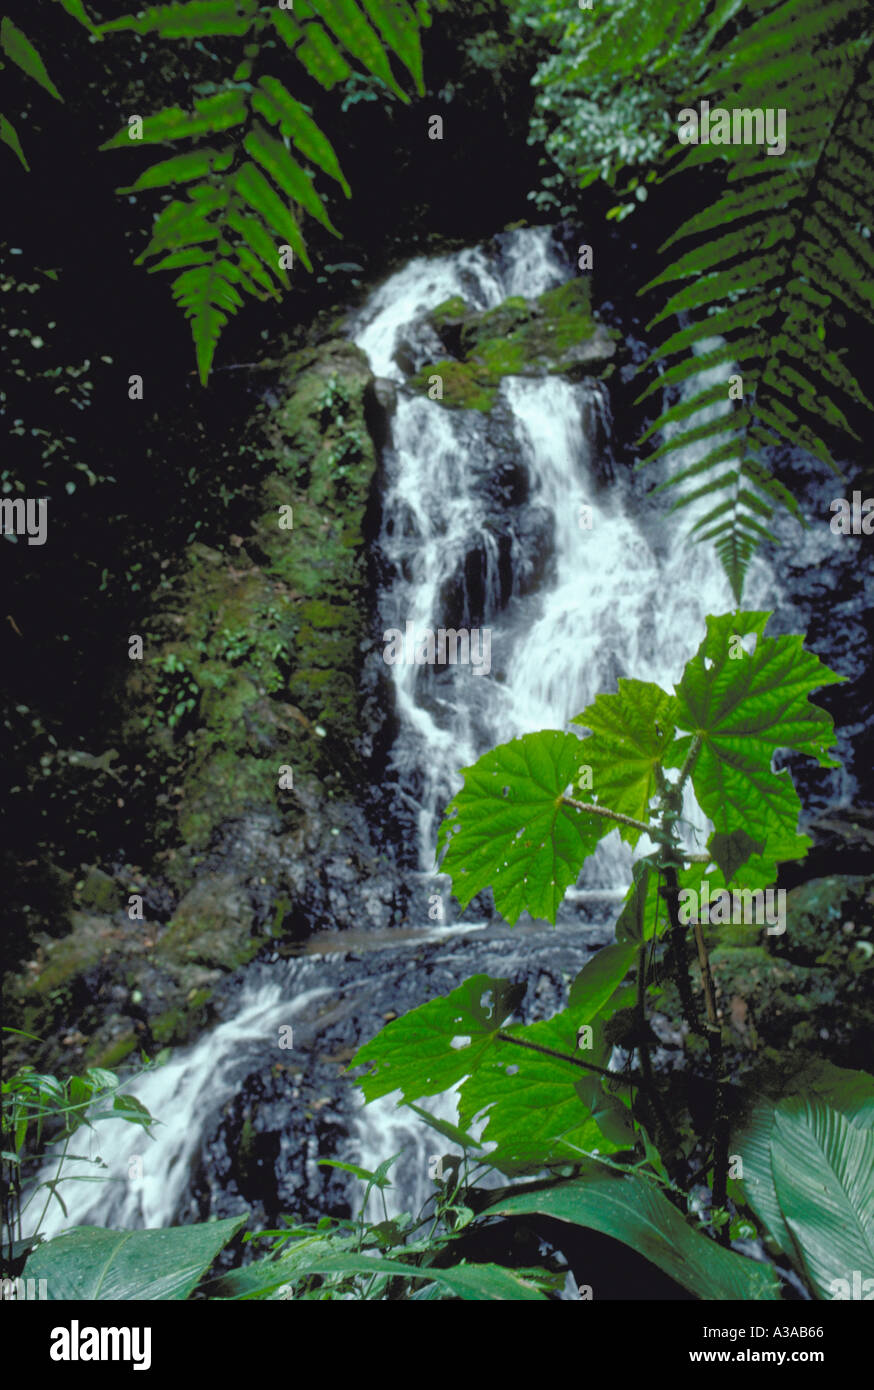 Begonia capanemae in front of waterfall. Atlantic Forest (Mata Atlântica), Serra do Mar mountain range, São Paulo State, Brazil. The Atlantic Forest is a biodiversity hotspot. Stock Photo